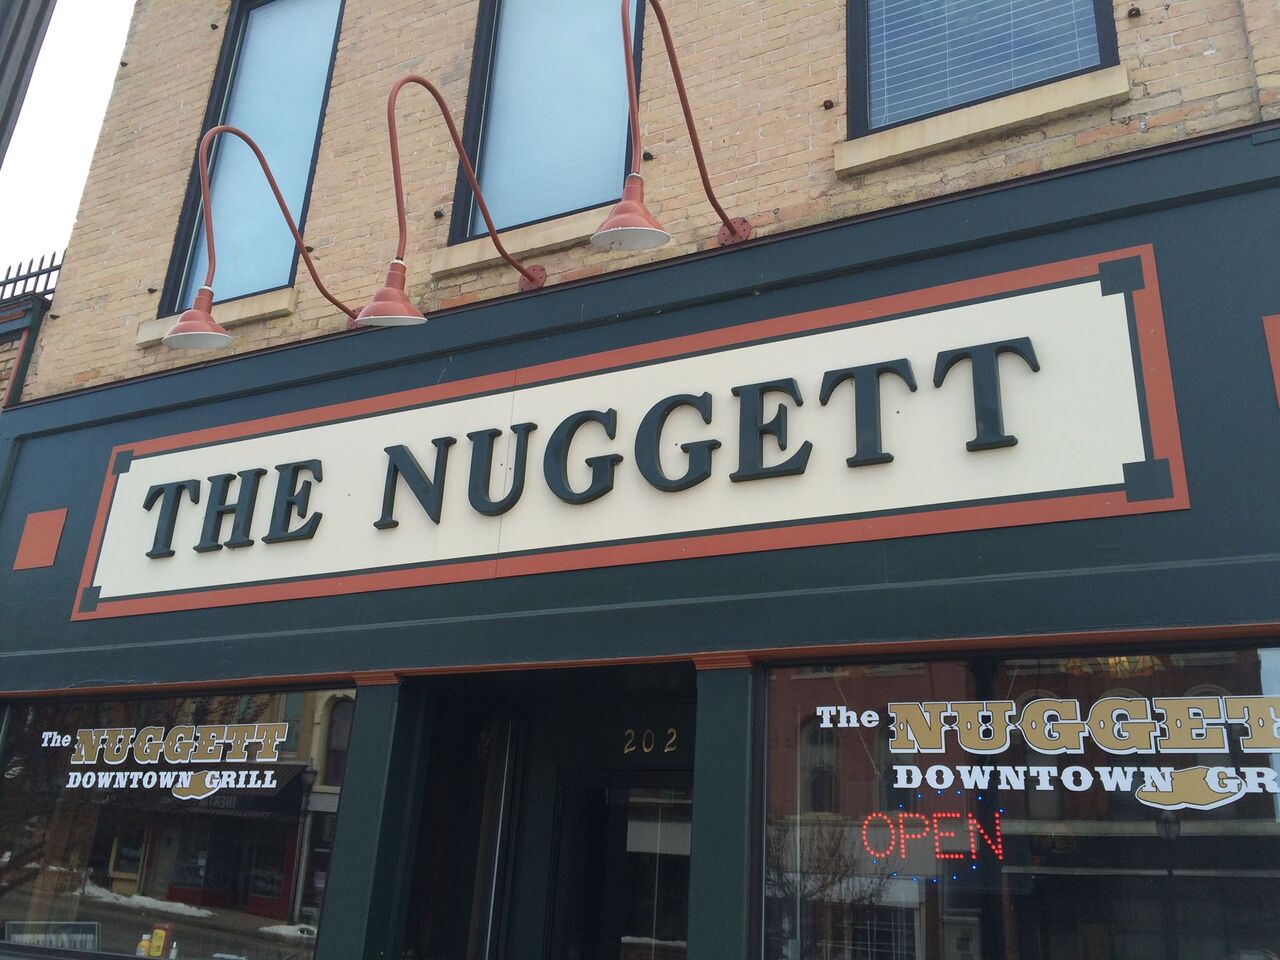 A photo of The Nuggett